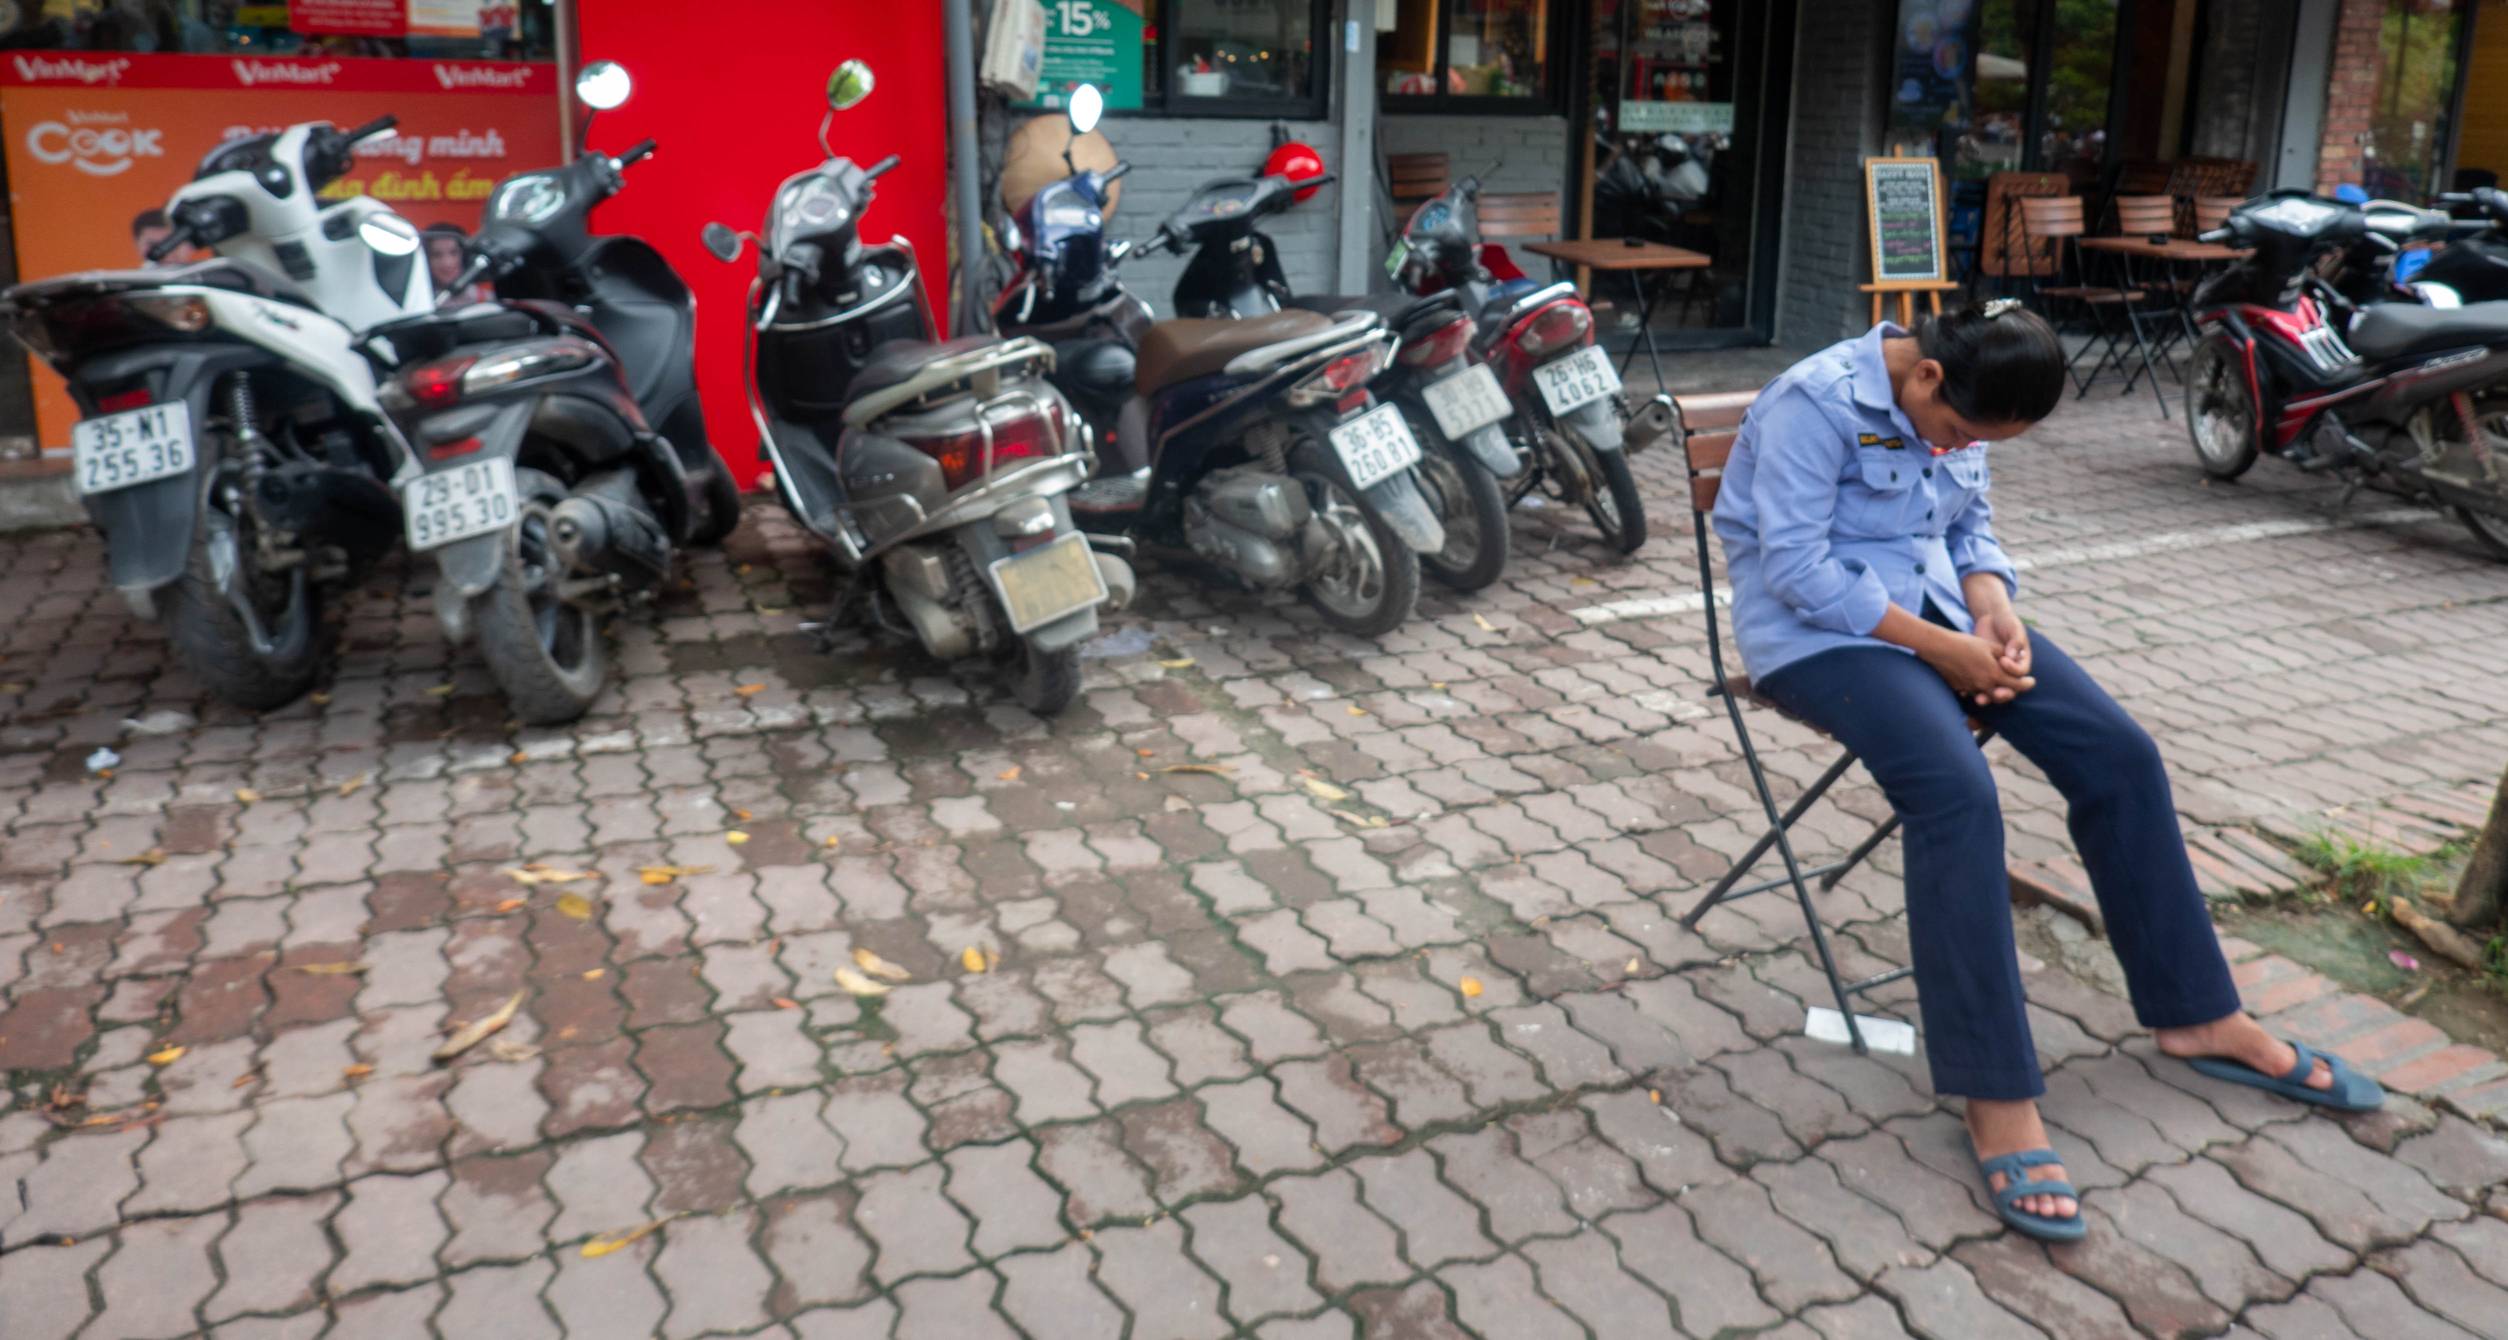 picture shows motorbikes parked in front of a business and in the foreground on the right is a women who is sitting in a chair who has fallen asleep.